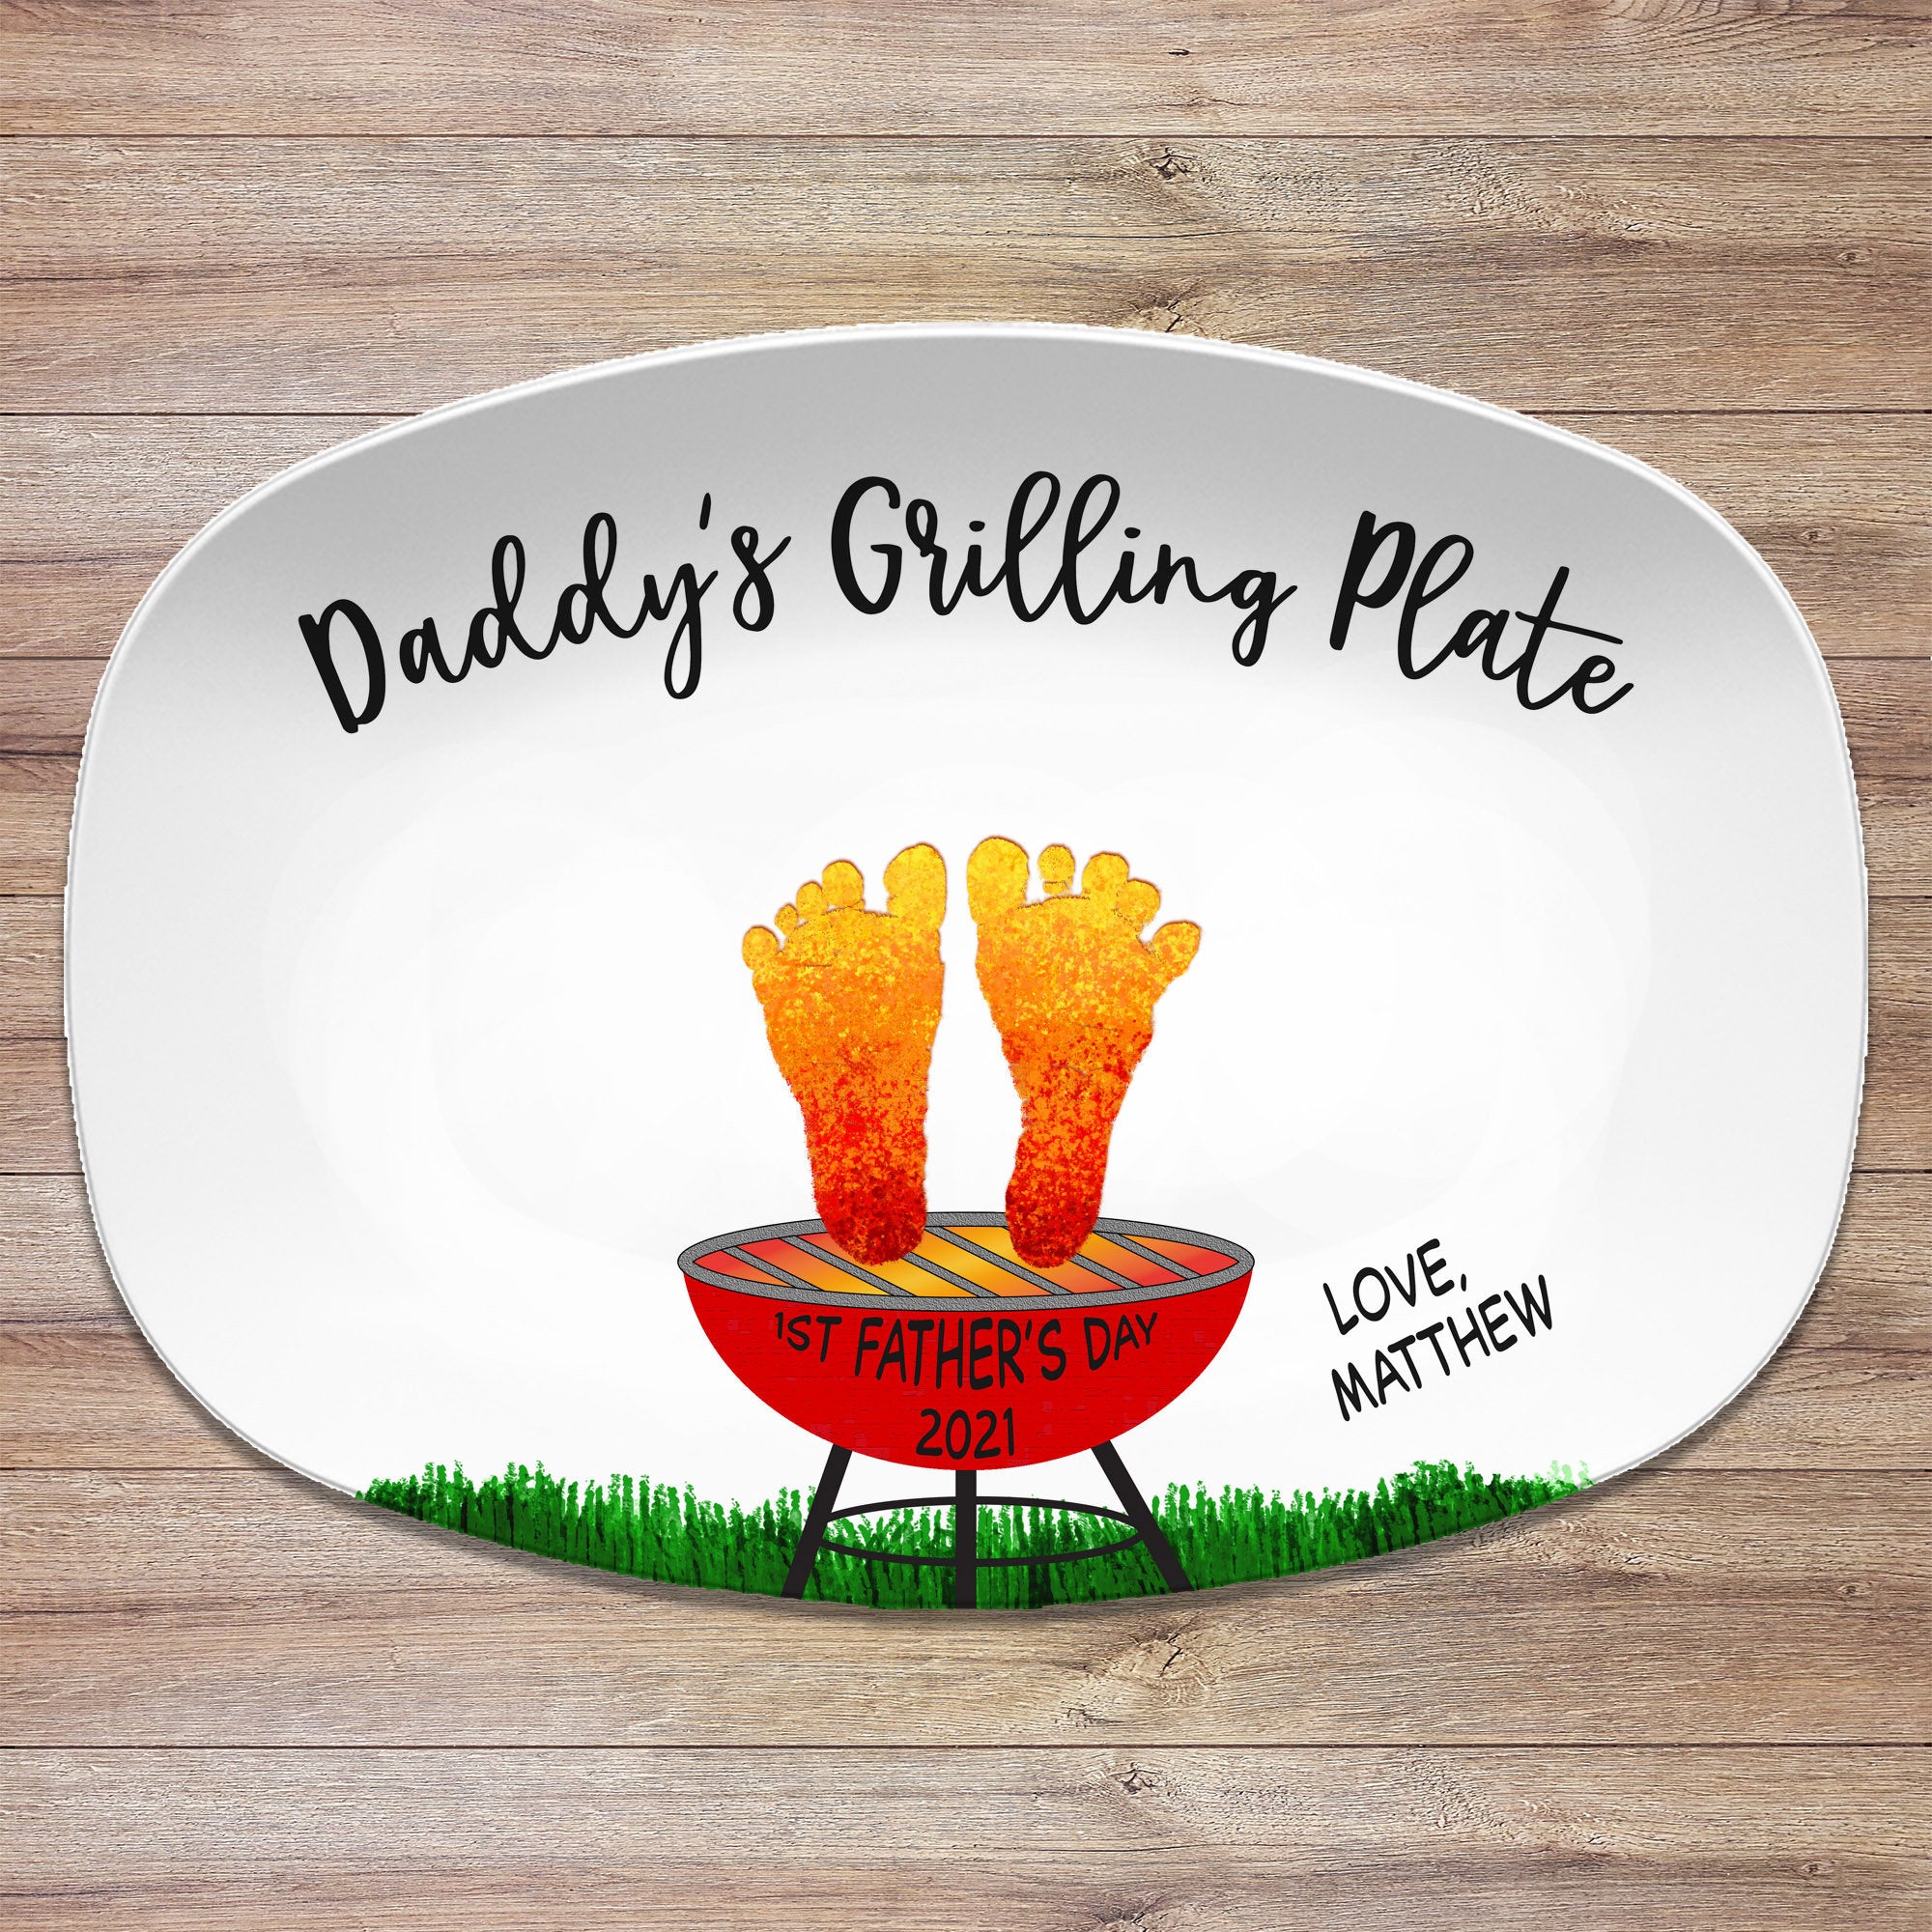 Grill Master BBQ Gifts, Personalized Grilling Plate, Dad Gift From